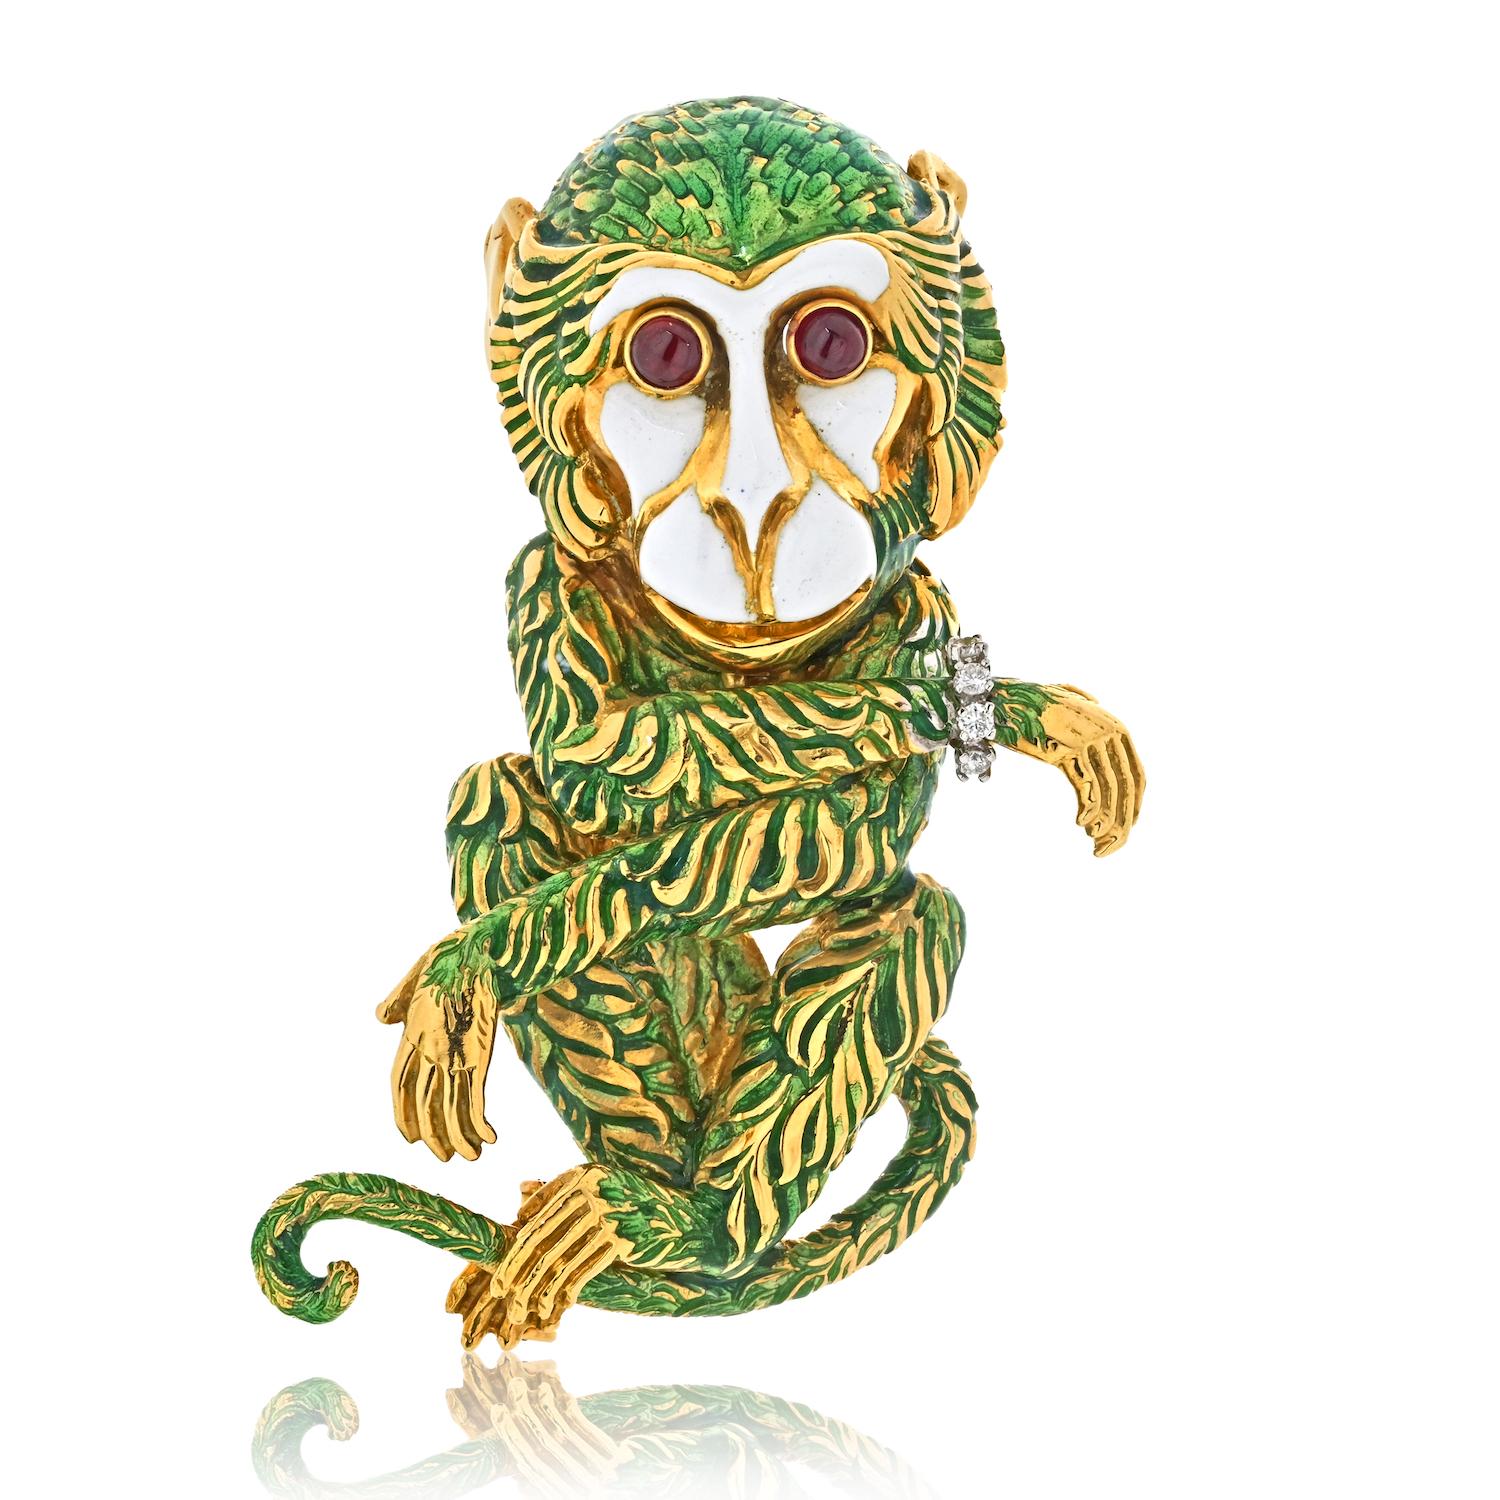 Since 1948, David Webb has carried forward a rich tradition of design, craftsmanship and creativity as an ICONIC American jewelry house.

David Webb Monkey with ruby cabochon eyes wearing a diamond bracelet. 

Length 2.25inches.

Approx. 52 gr.

The